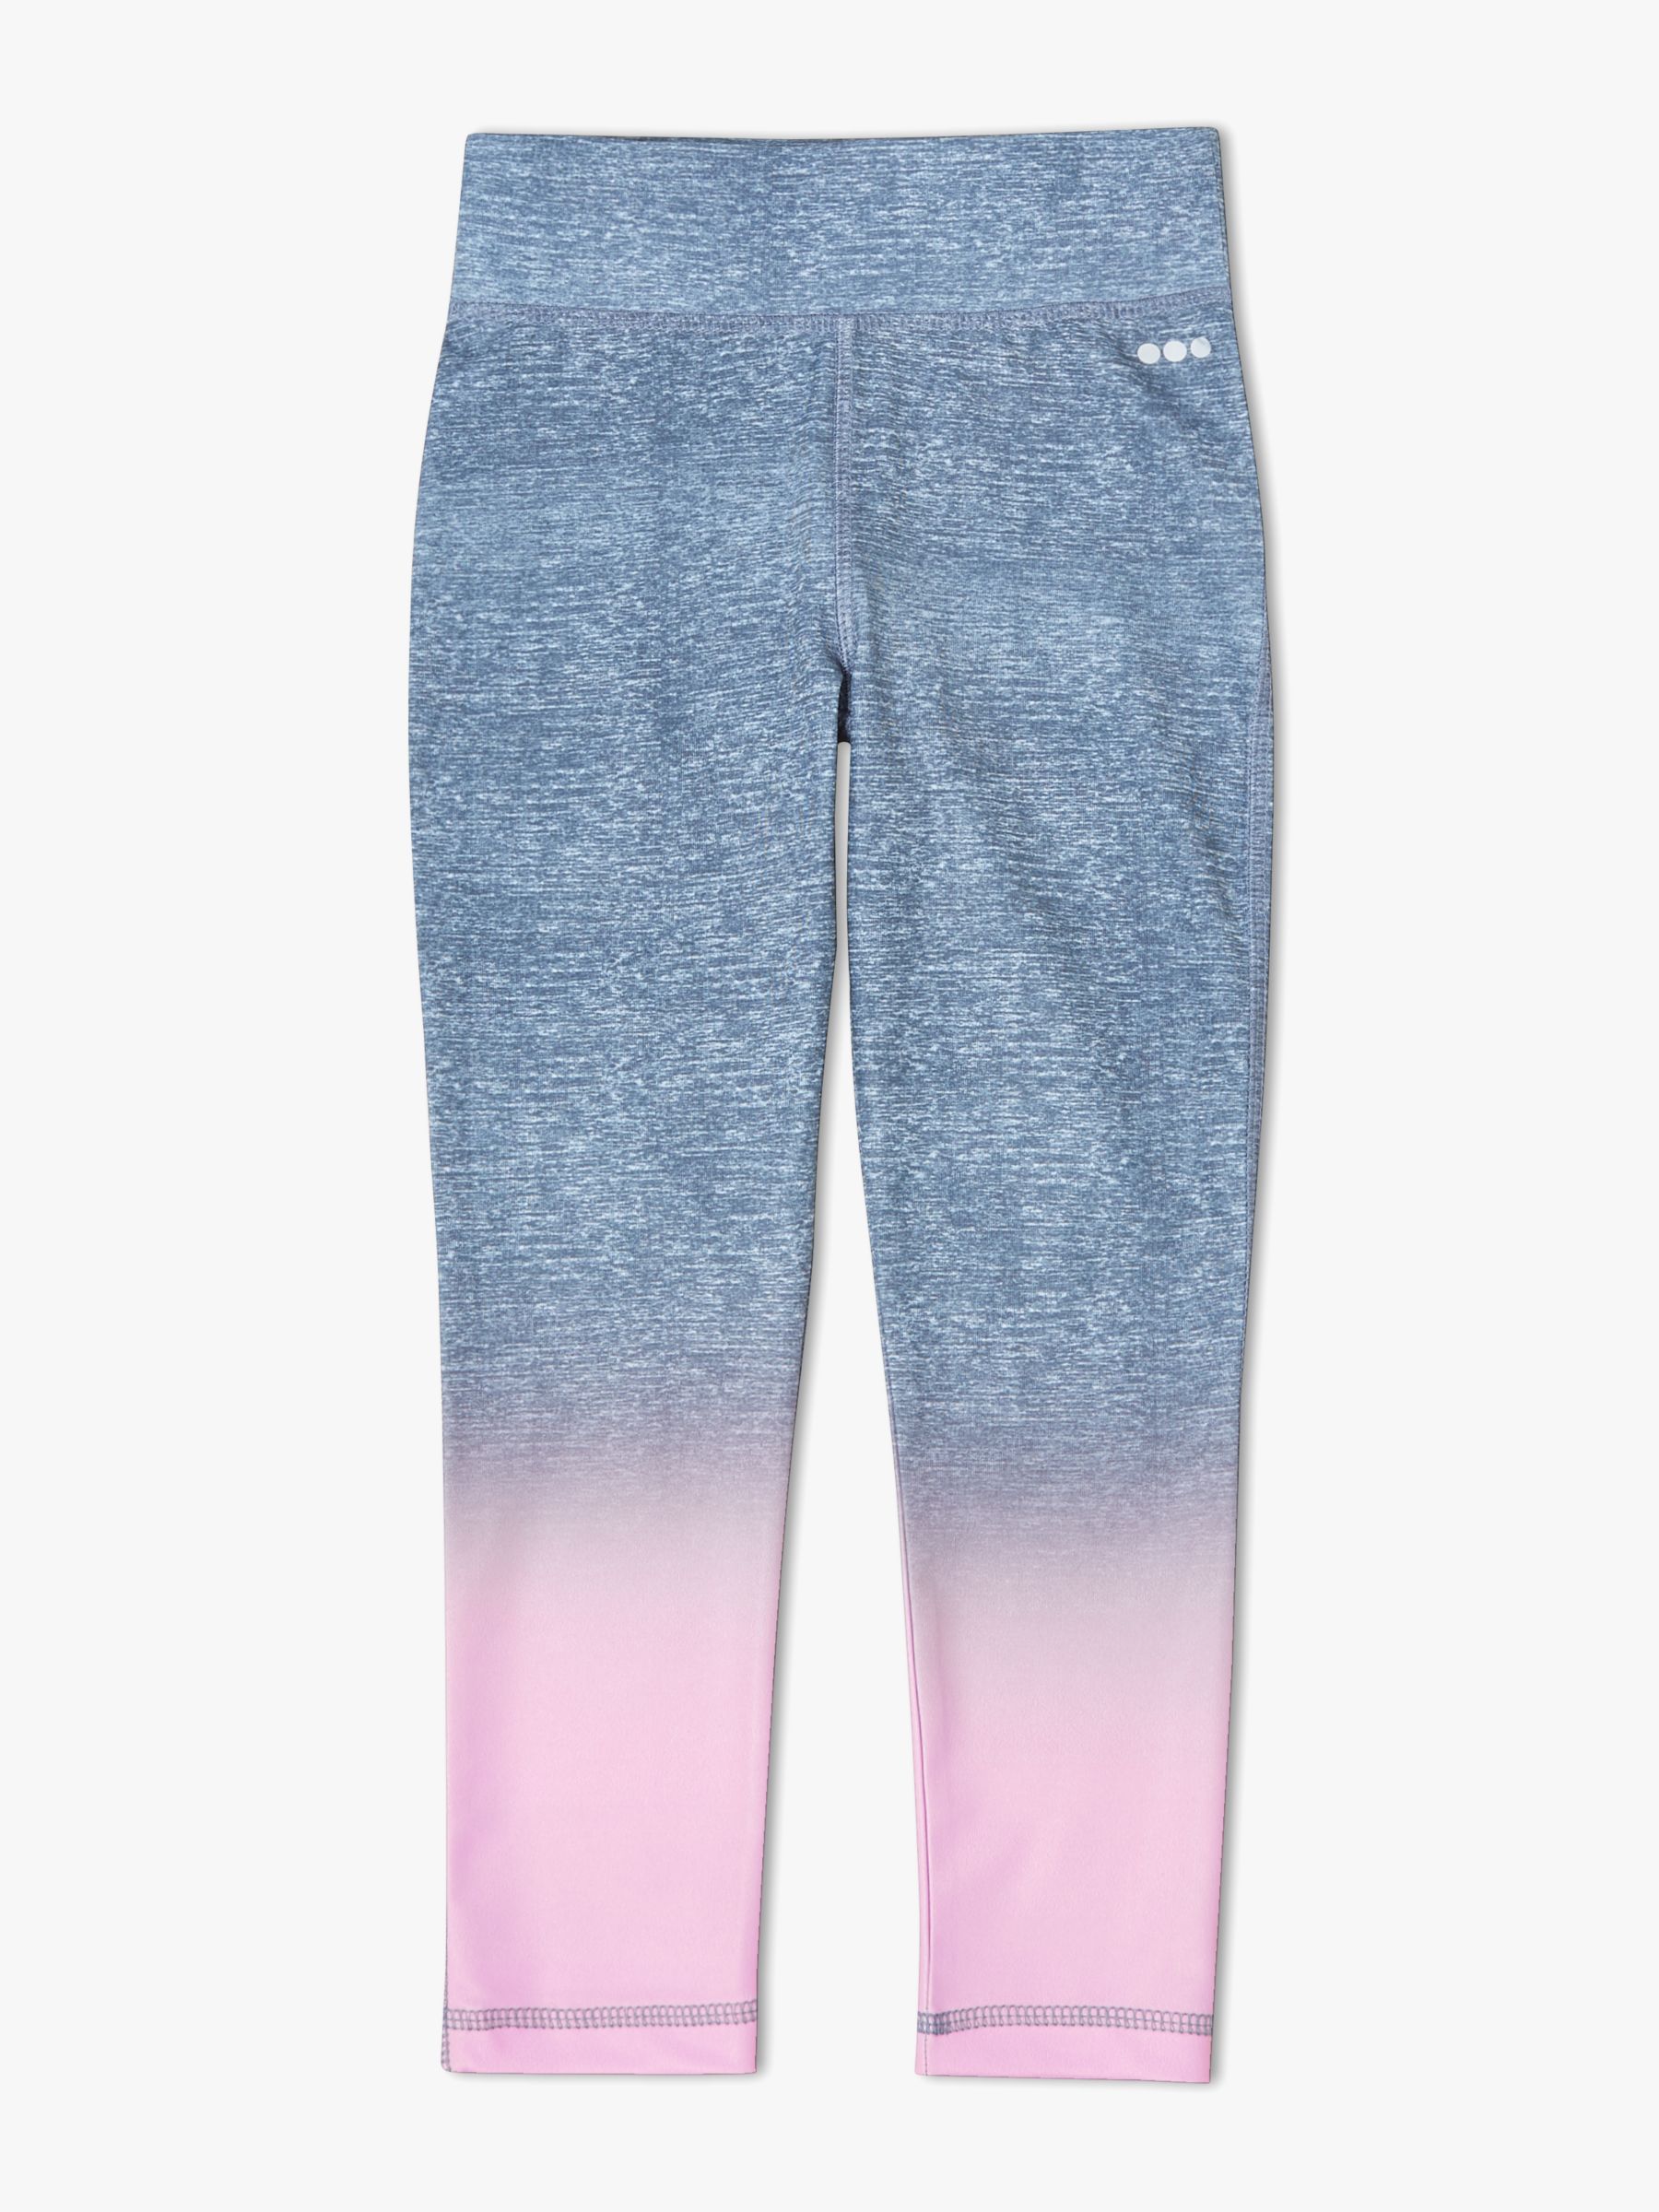 John Lewis & Partners Girls' Ombre Sports Leggings, Lilac, 7 years